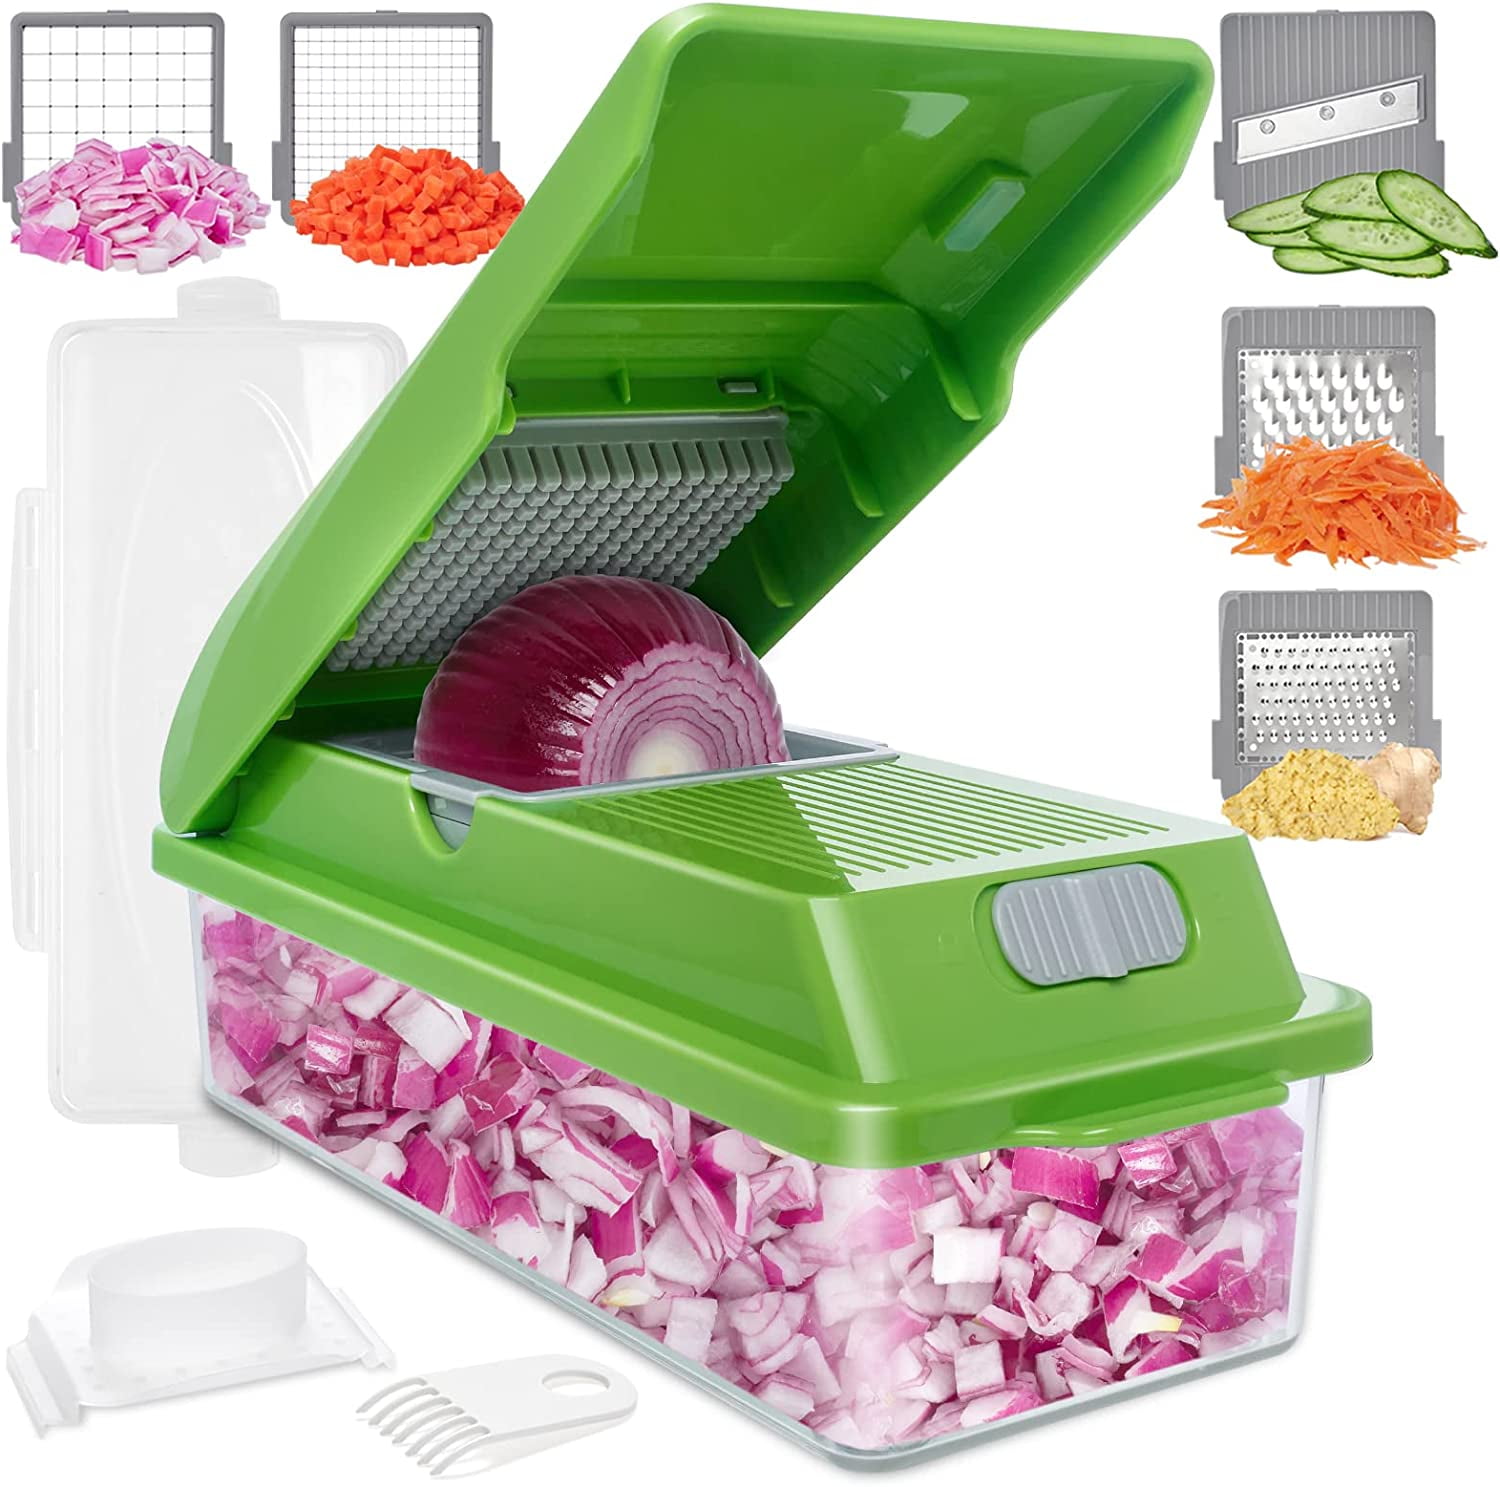 Dartwood All-in-One Vegetable Chopper - Kitchen Meal Prep Container - for Vegetable Chopping, Slicing, and Dicing (Transparent)